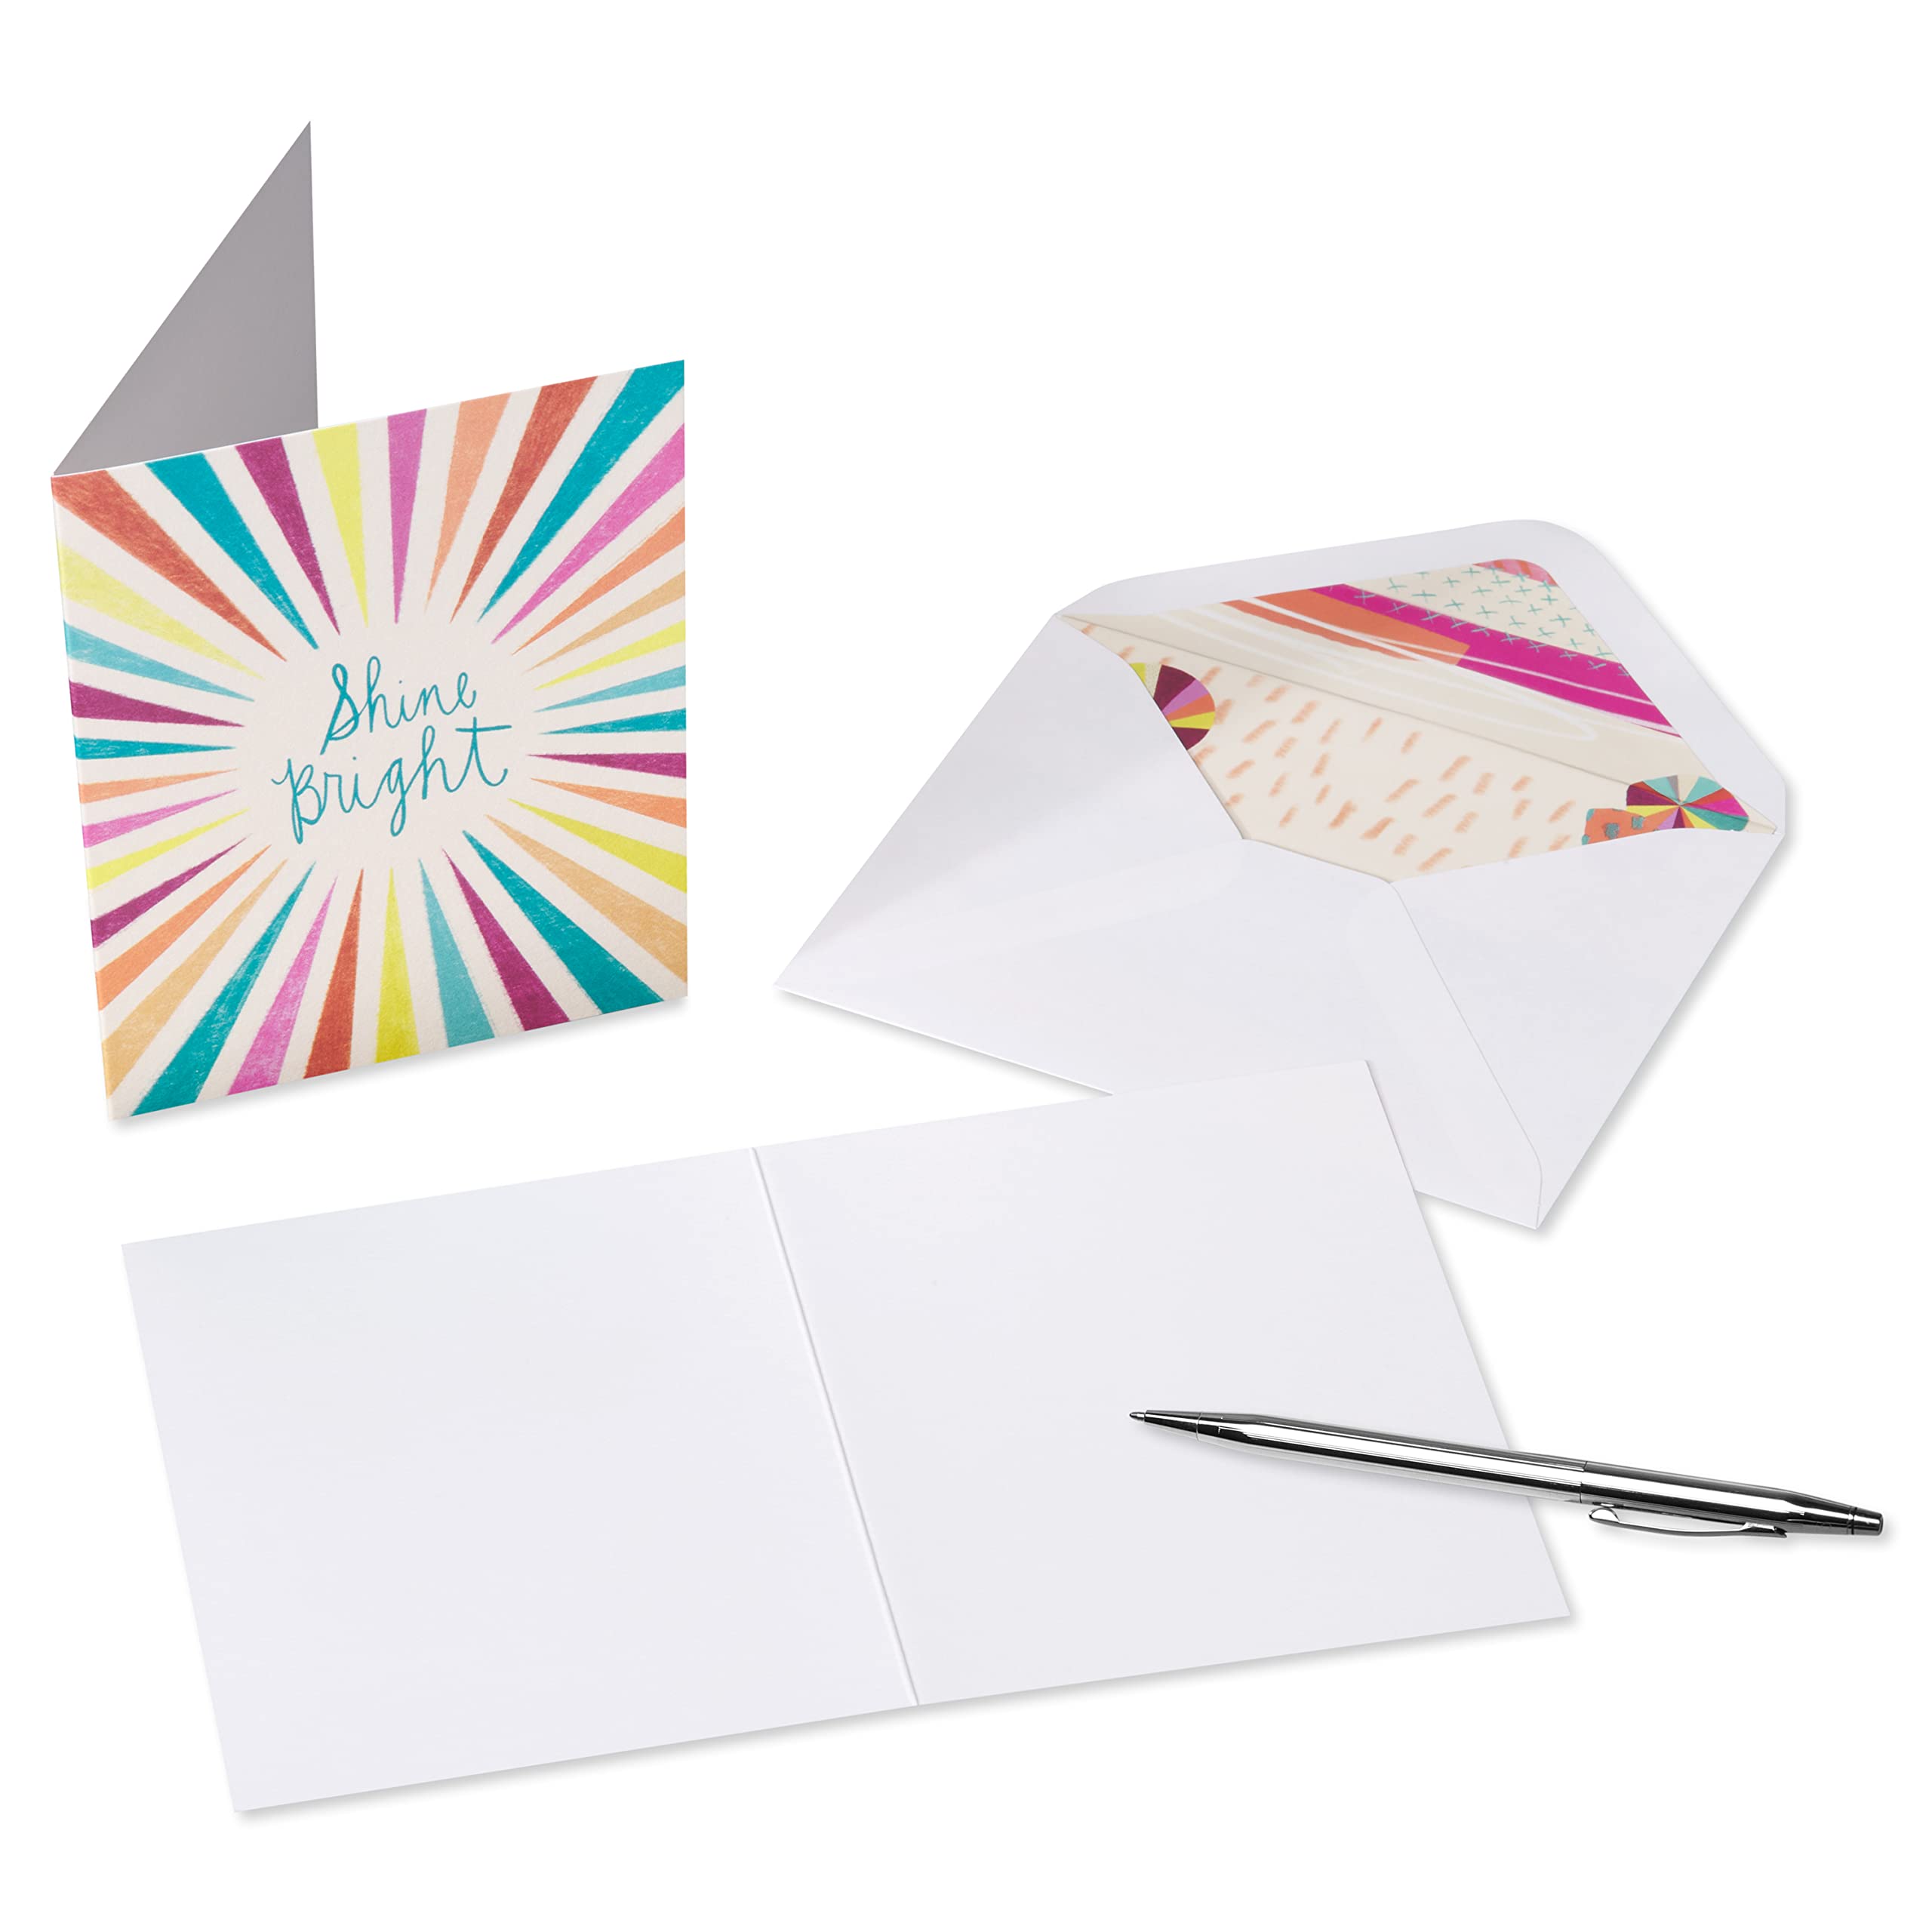 Papyrus Blank Encouragement Cards with Envelopes, Power Affirmations (20-Count)